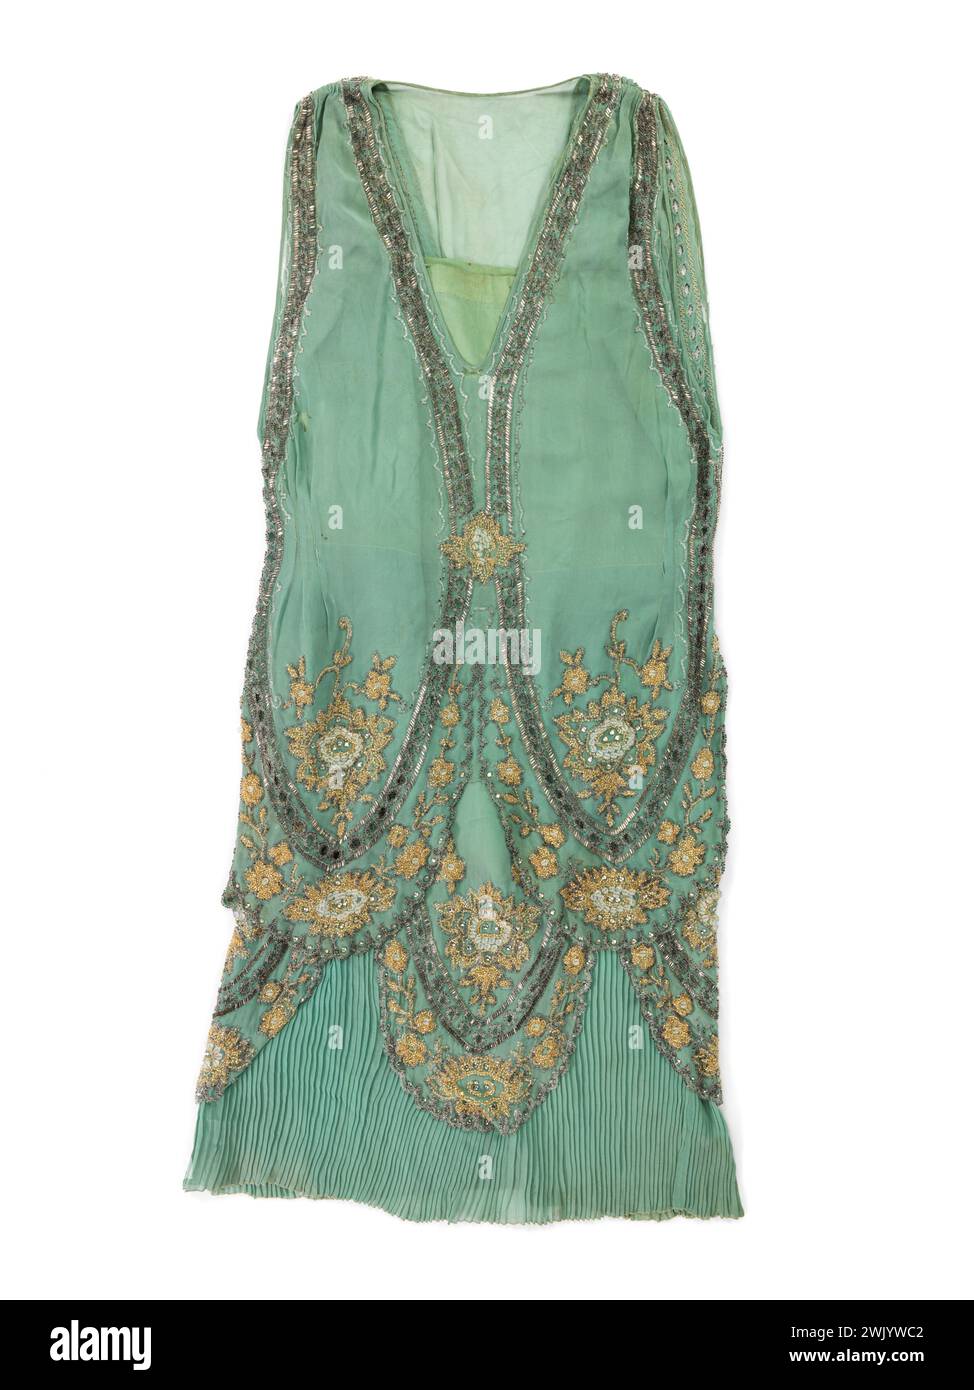 Anonymous, tunic and dress (common name), 1925. Georgette pancake, pearl embroidery, glass tubes, rhinestones. Chinese crepe. Palais Galliera, fashion museum of the city of Paris. Stock Photo